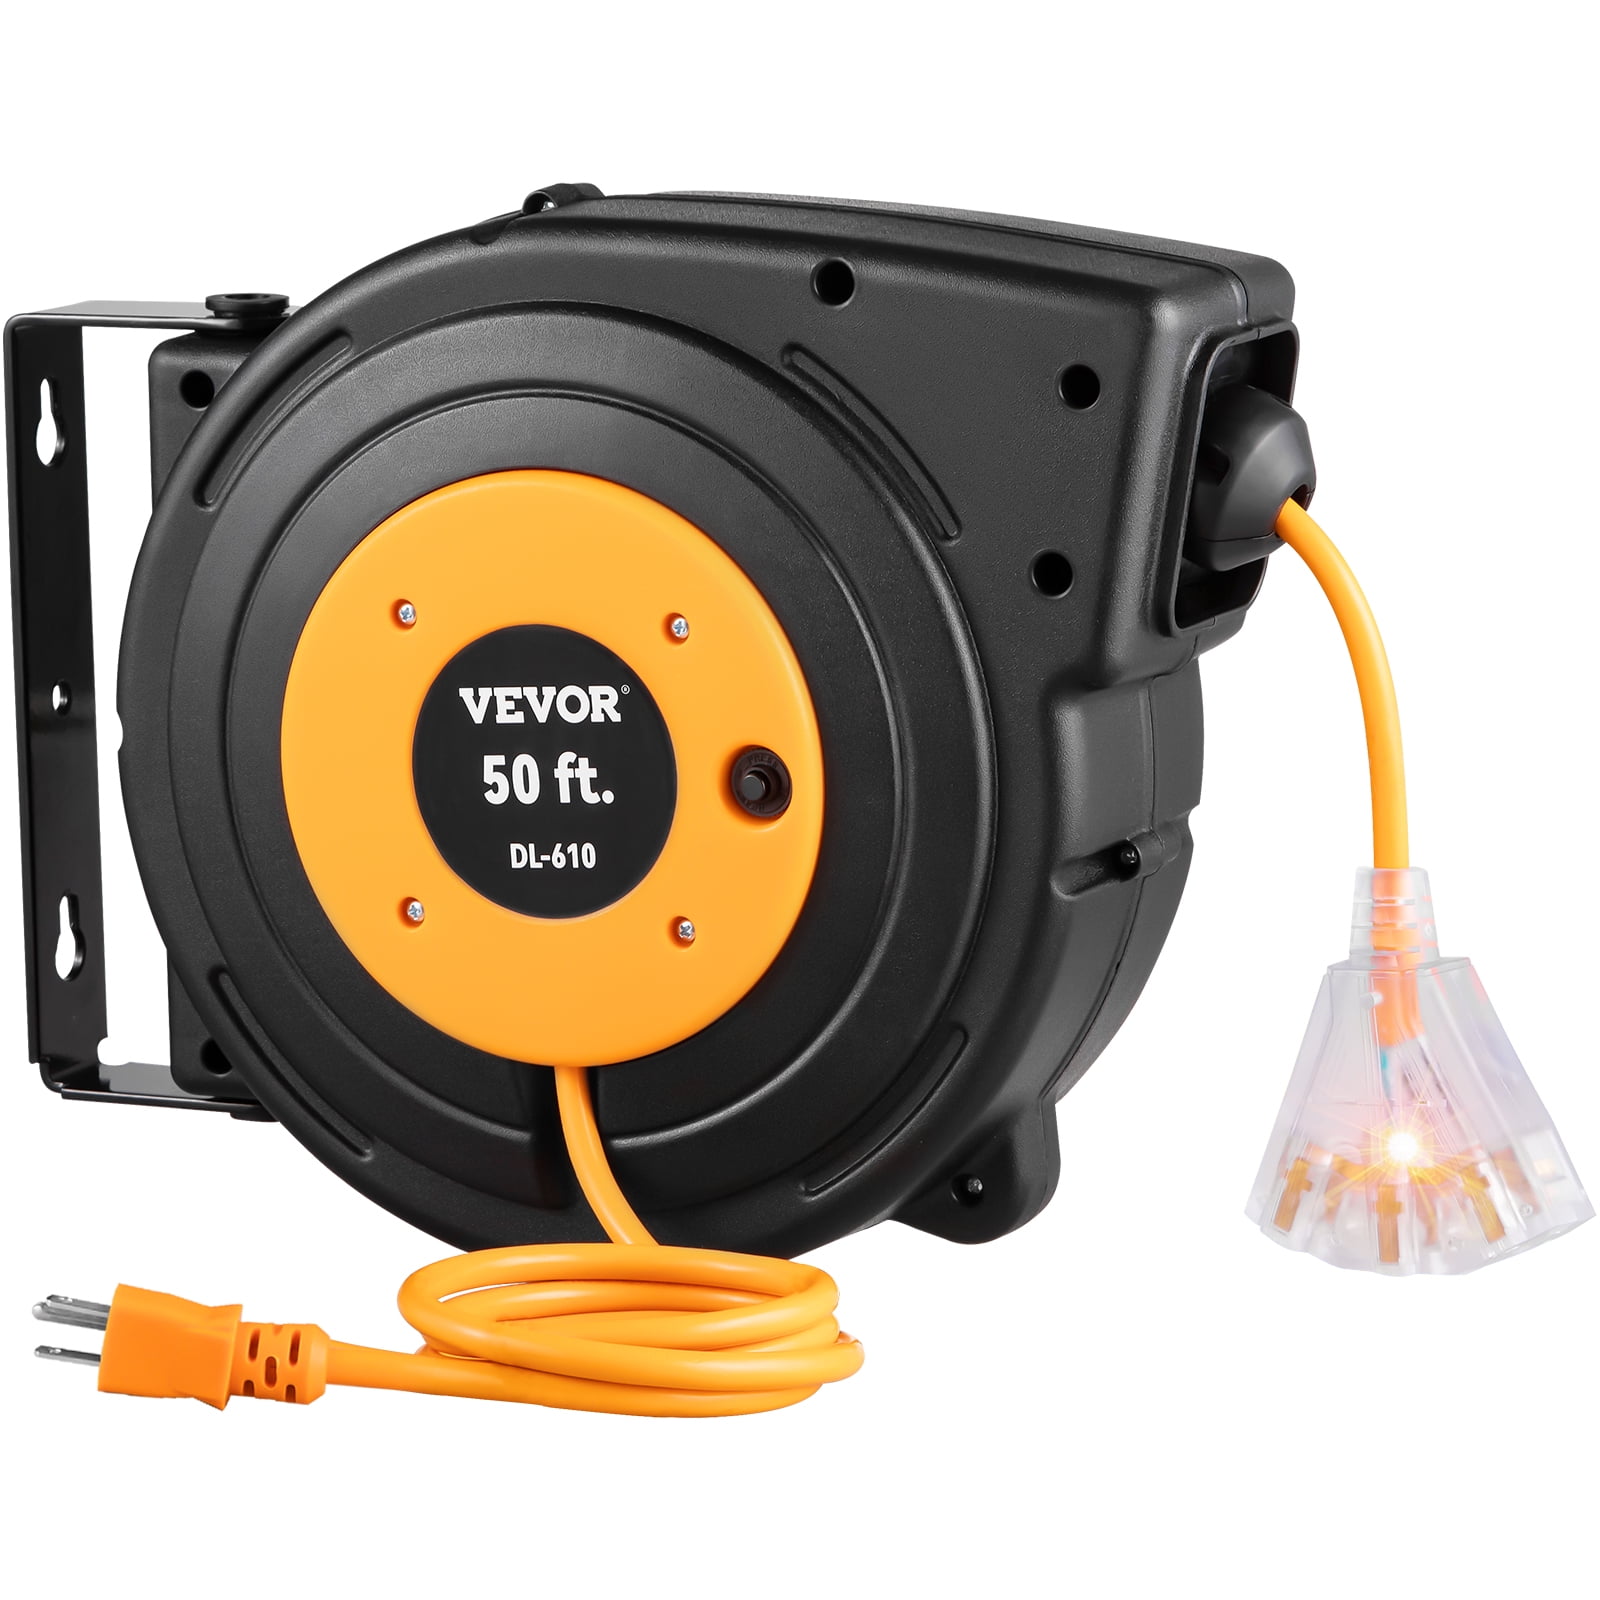 VEVOR Retractable Extension Cord Reel, 50 ft, Heavy Duty 14AWG/3C Sjtow Power Cord, with Lighted Triple Tap Outlet, 13 Amp Circuit Breaker, 180°